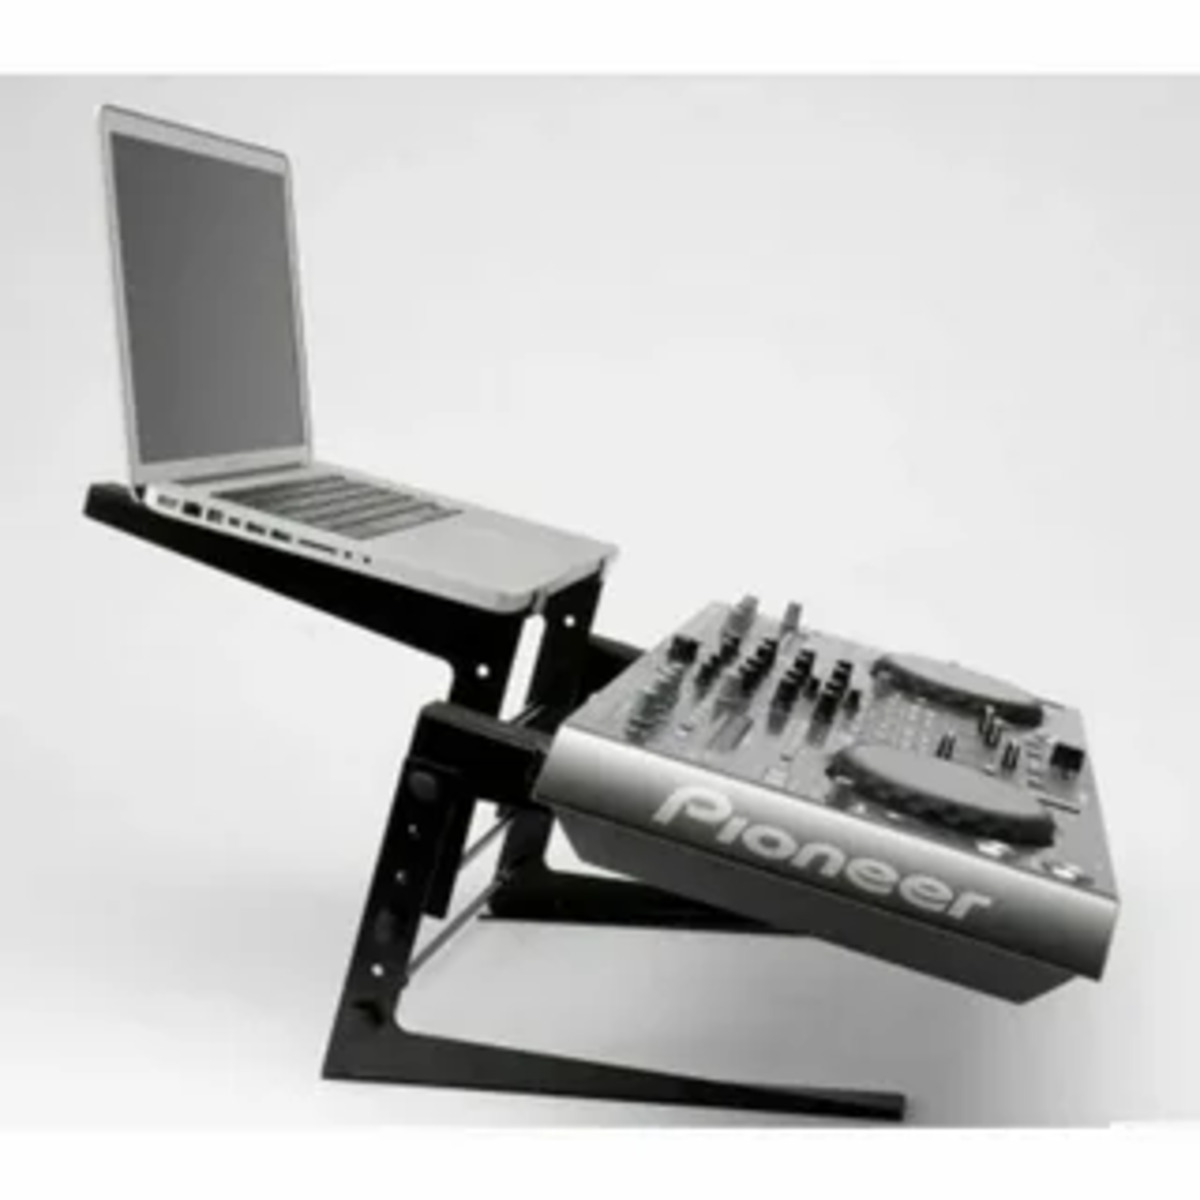 Dj Laptop Stand: Laptop Stands for DJ’s Detail Review